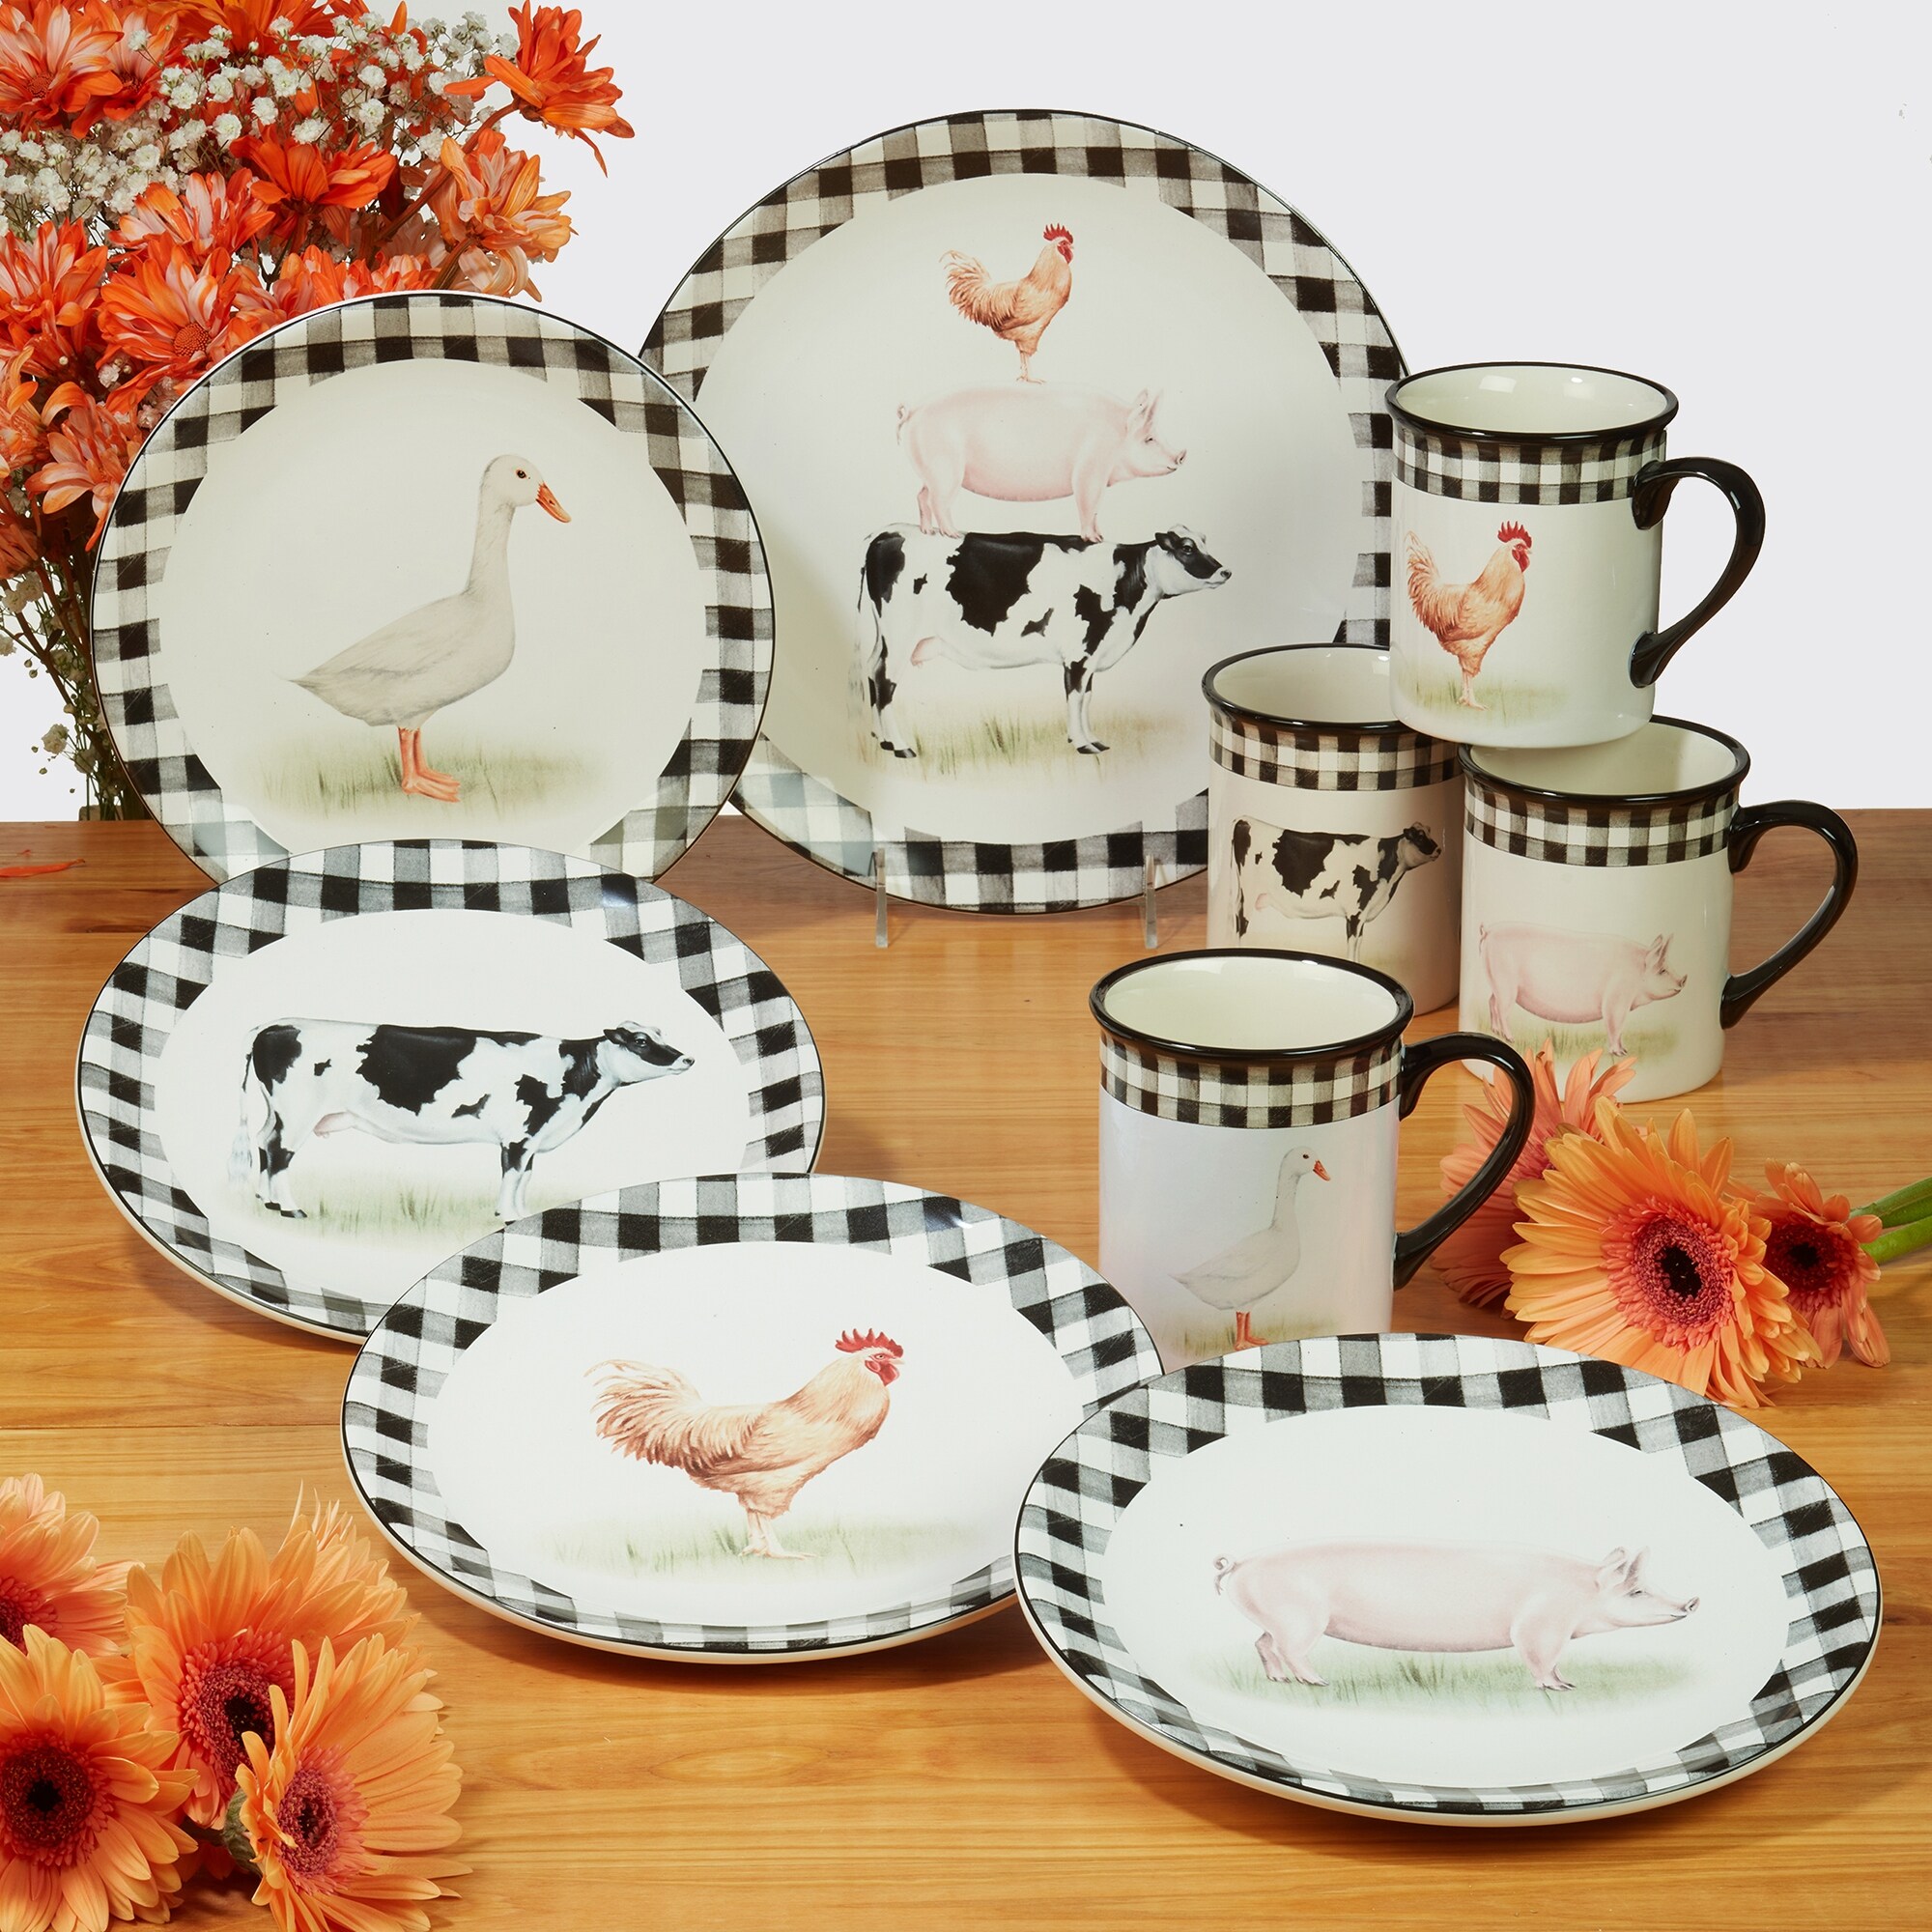 Down On The Farm 16-Piece Dinnerware Set and Canisters